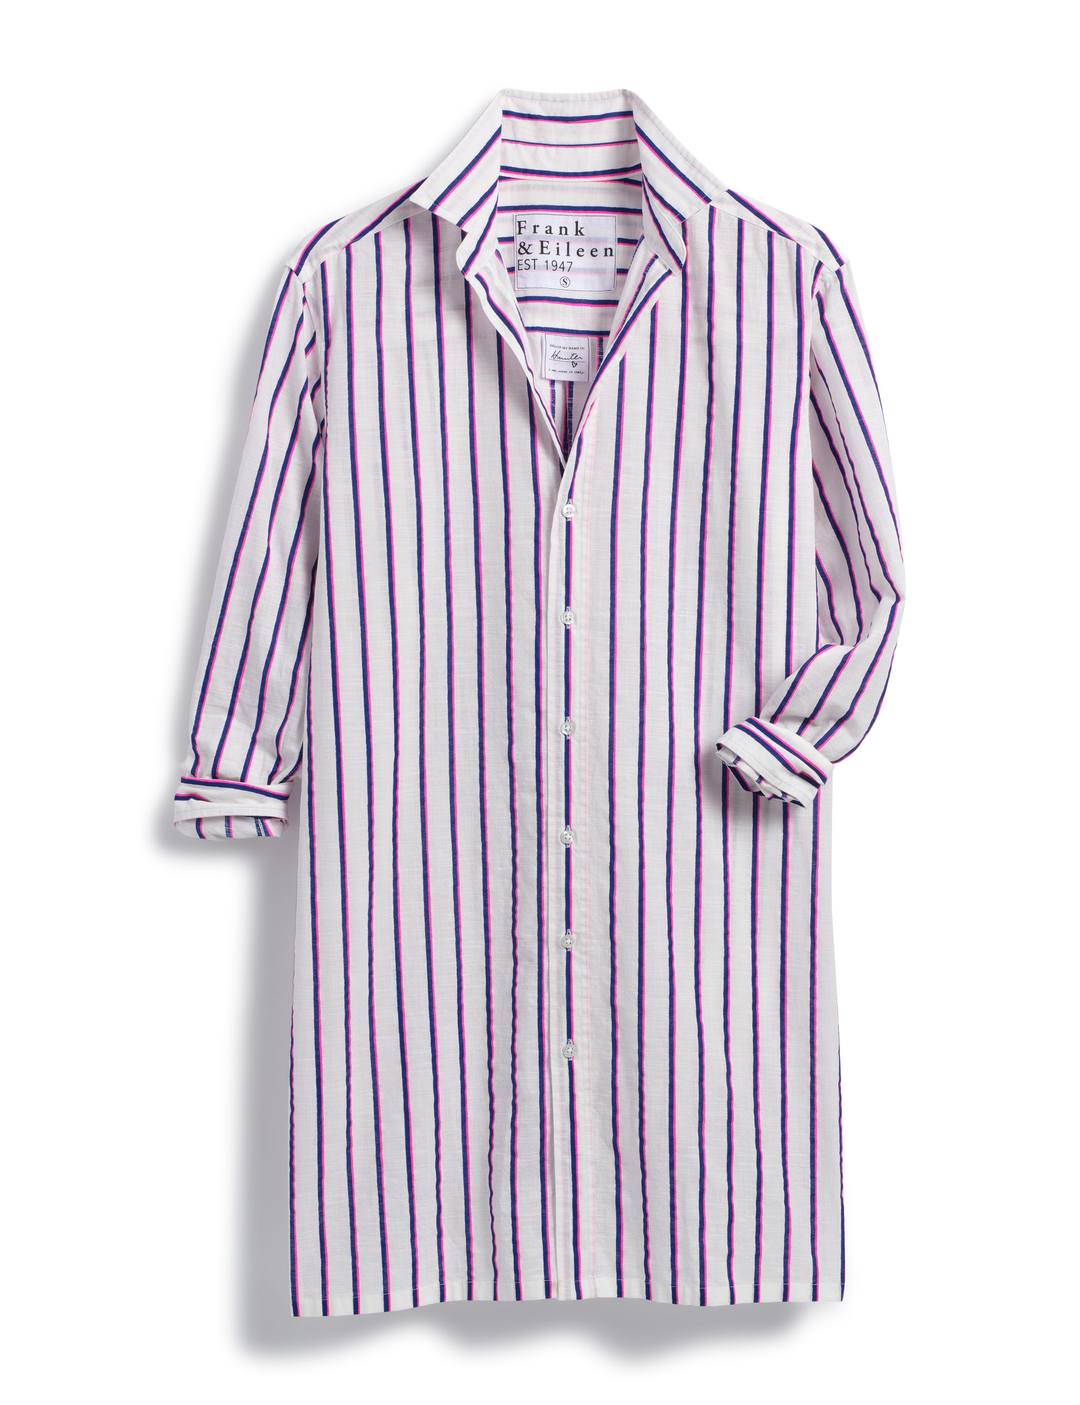 Frank & Eileen - Hunter Woven Button Up Dress in Neon Pink and Blue Stripe